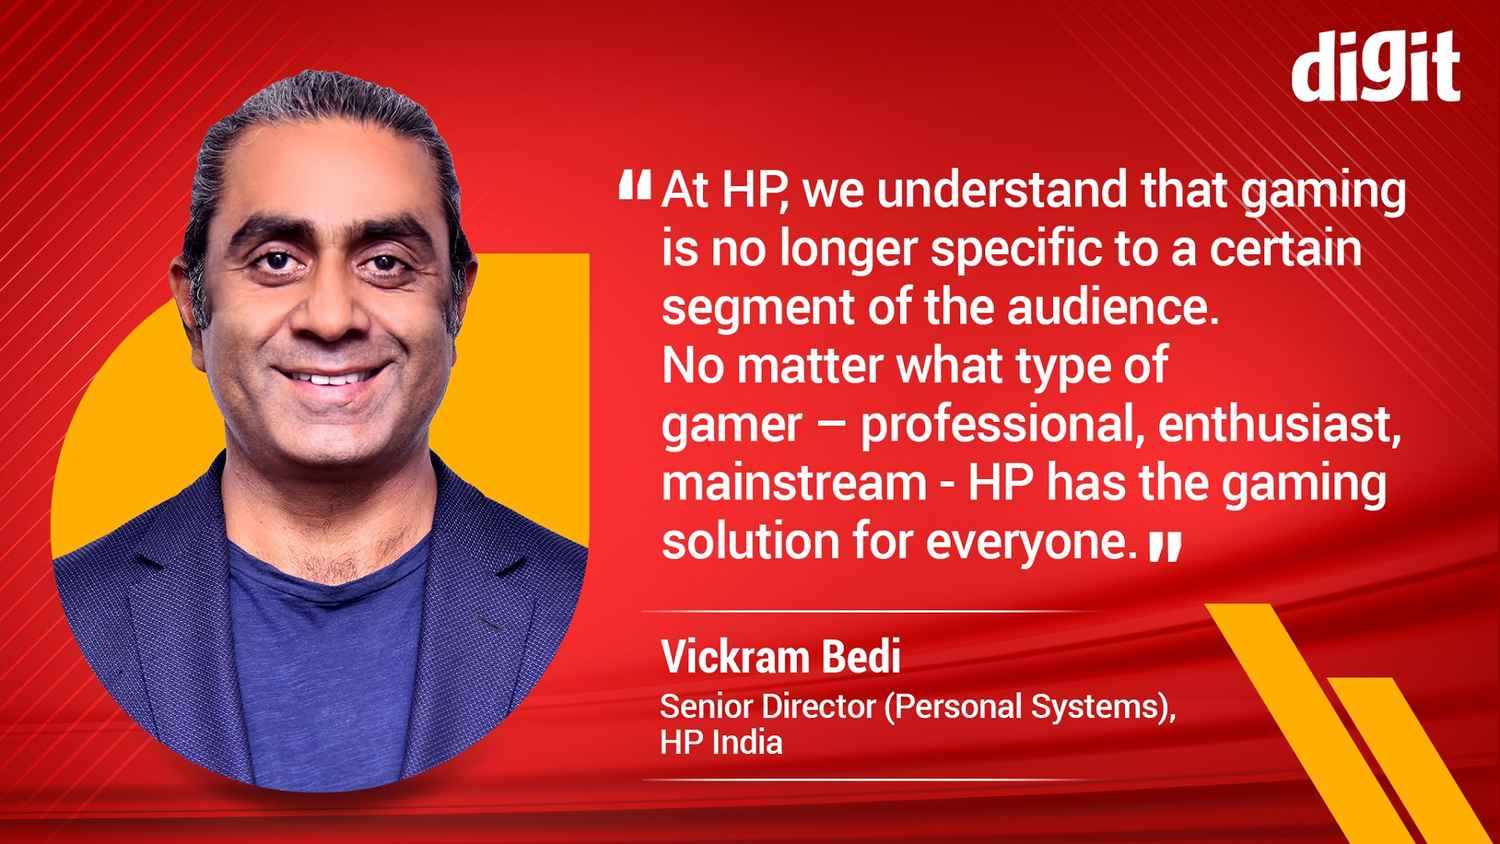 Vickram Bedi from HP India on how the all-new HP OMEN 17 is set to level up gaming in India.